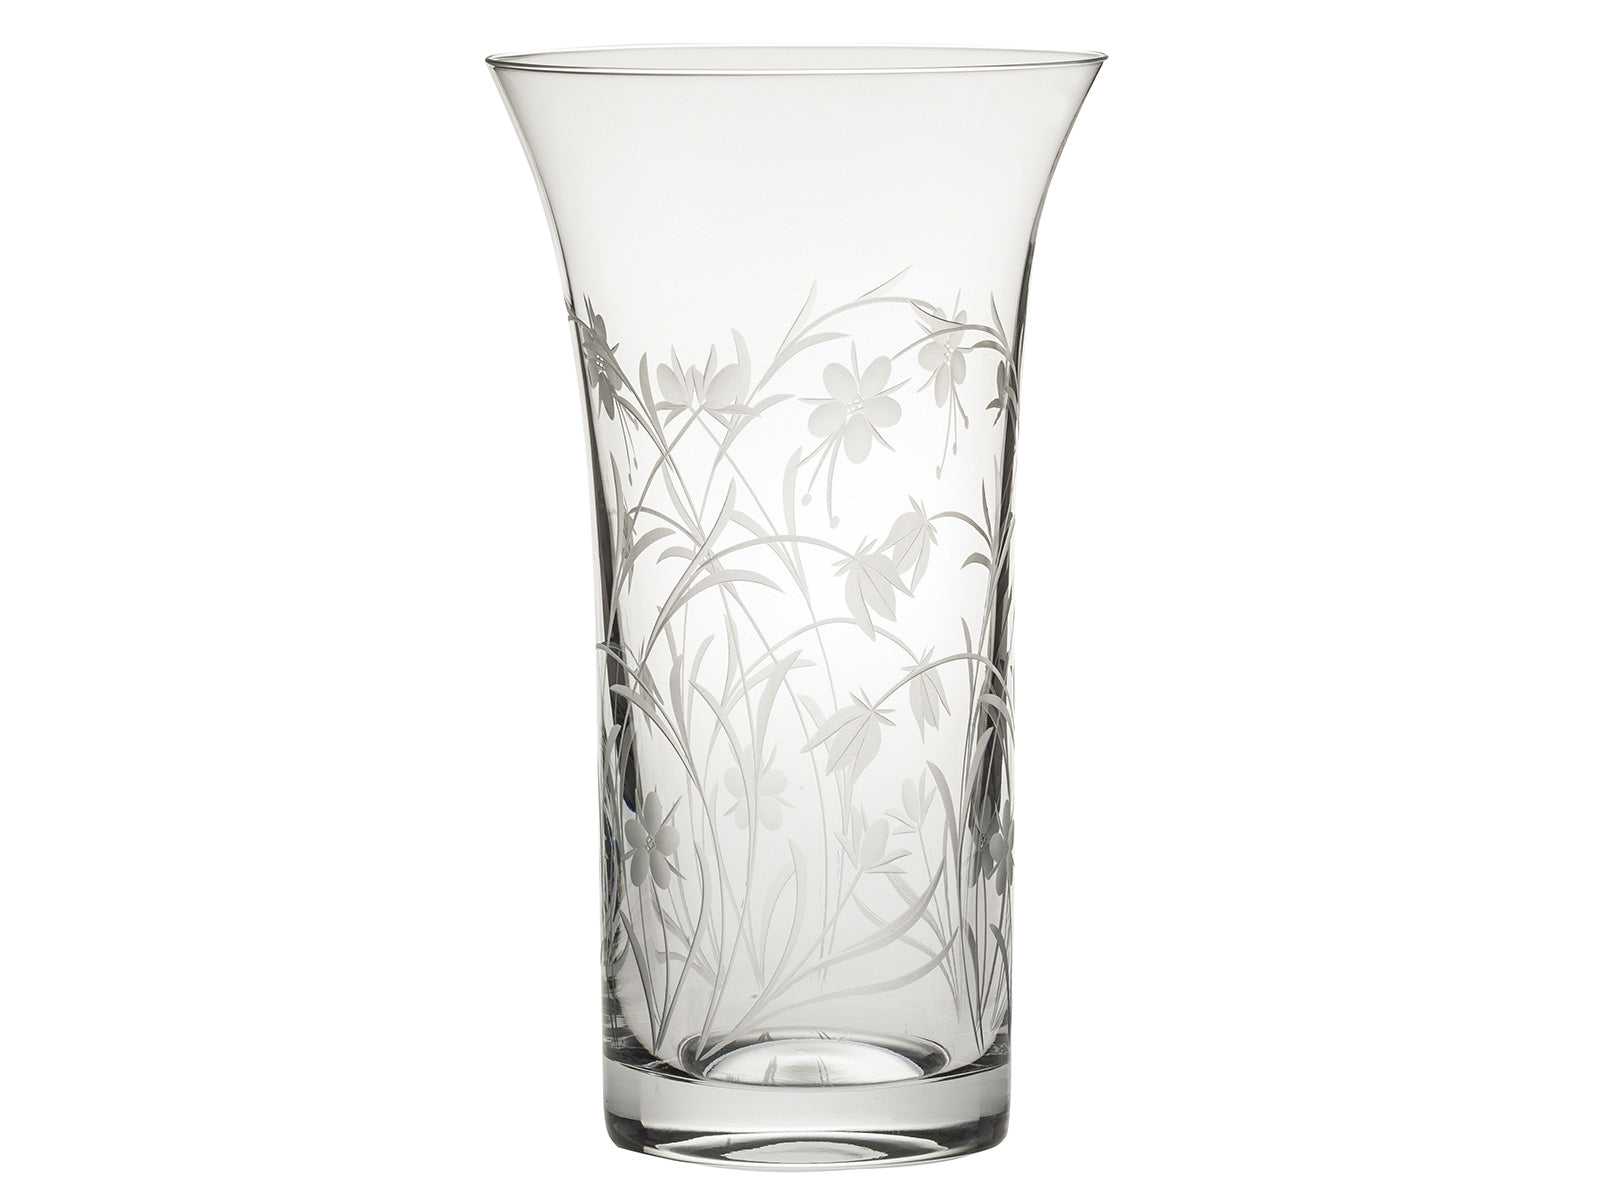 A straight vase with a gently flared lip, engraved with a winding wildflower design around the outside.